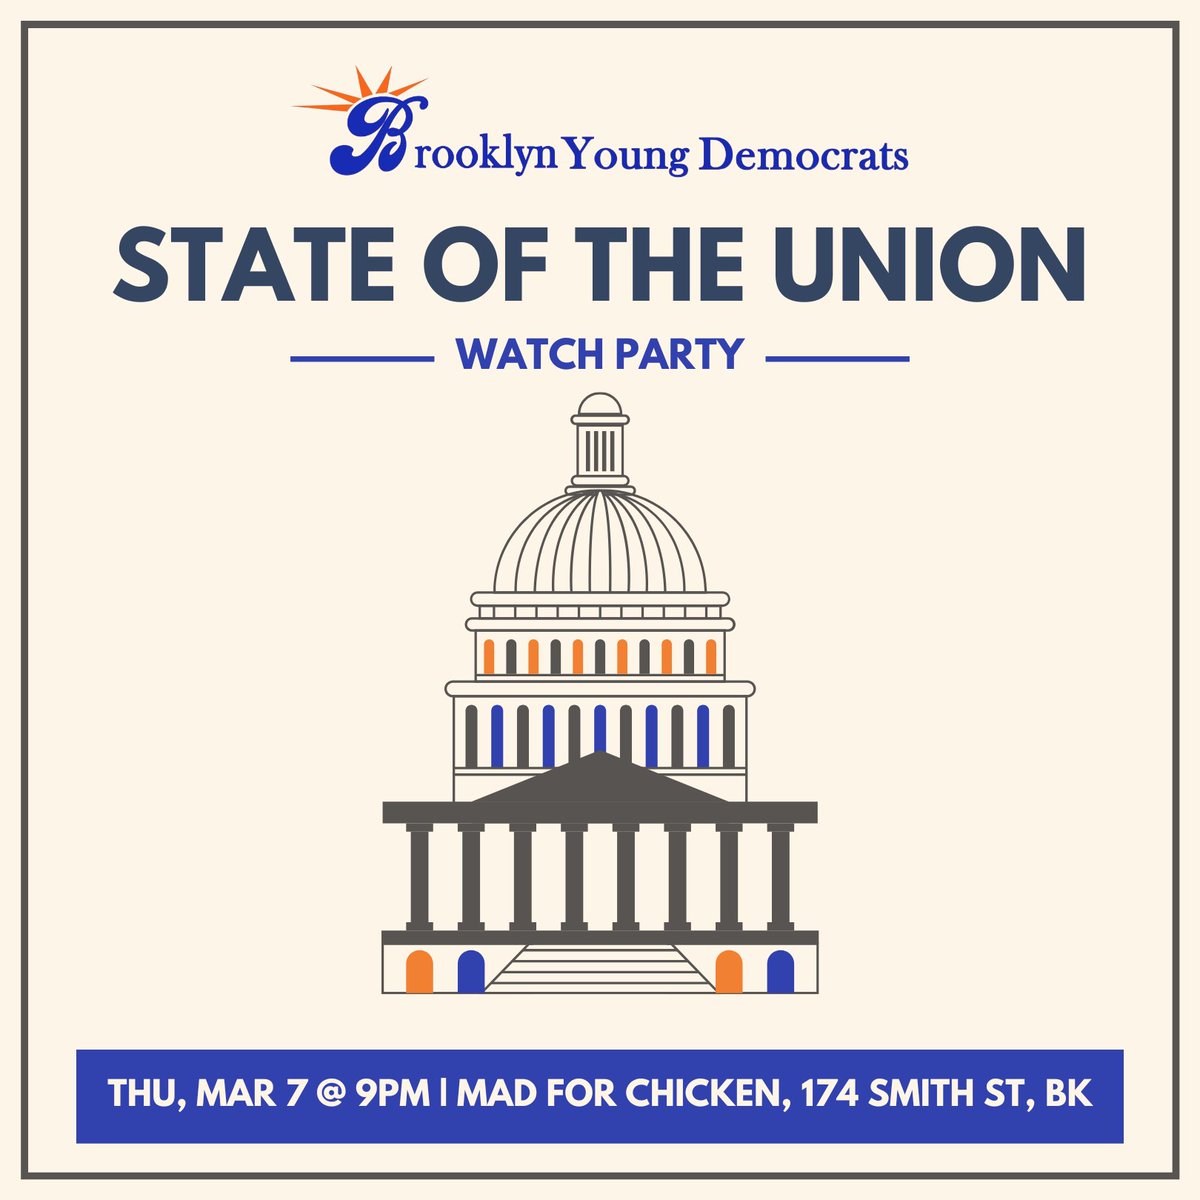 Join us in Cobble Hill on Thursday night to watch President Biden's State of the Union address! Meet other young Democrats as we gather and watch this important speech. RSVP: tinyurl.com/bydsotu24